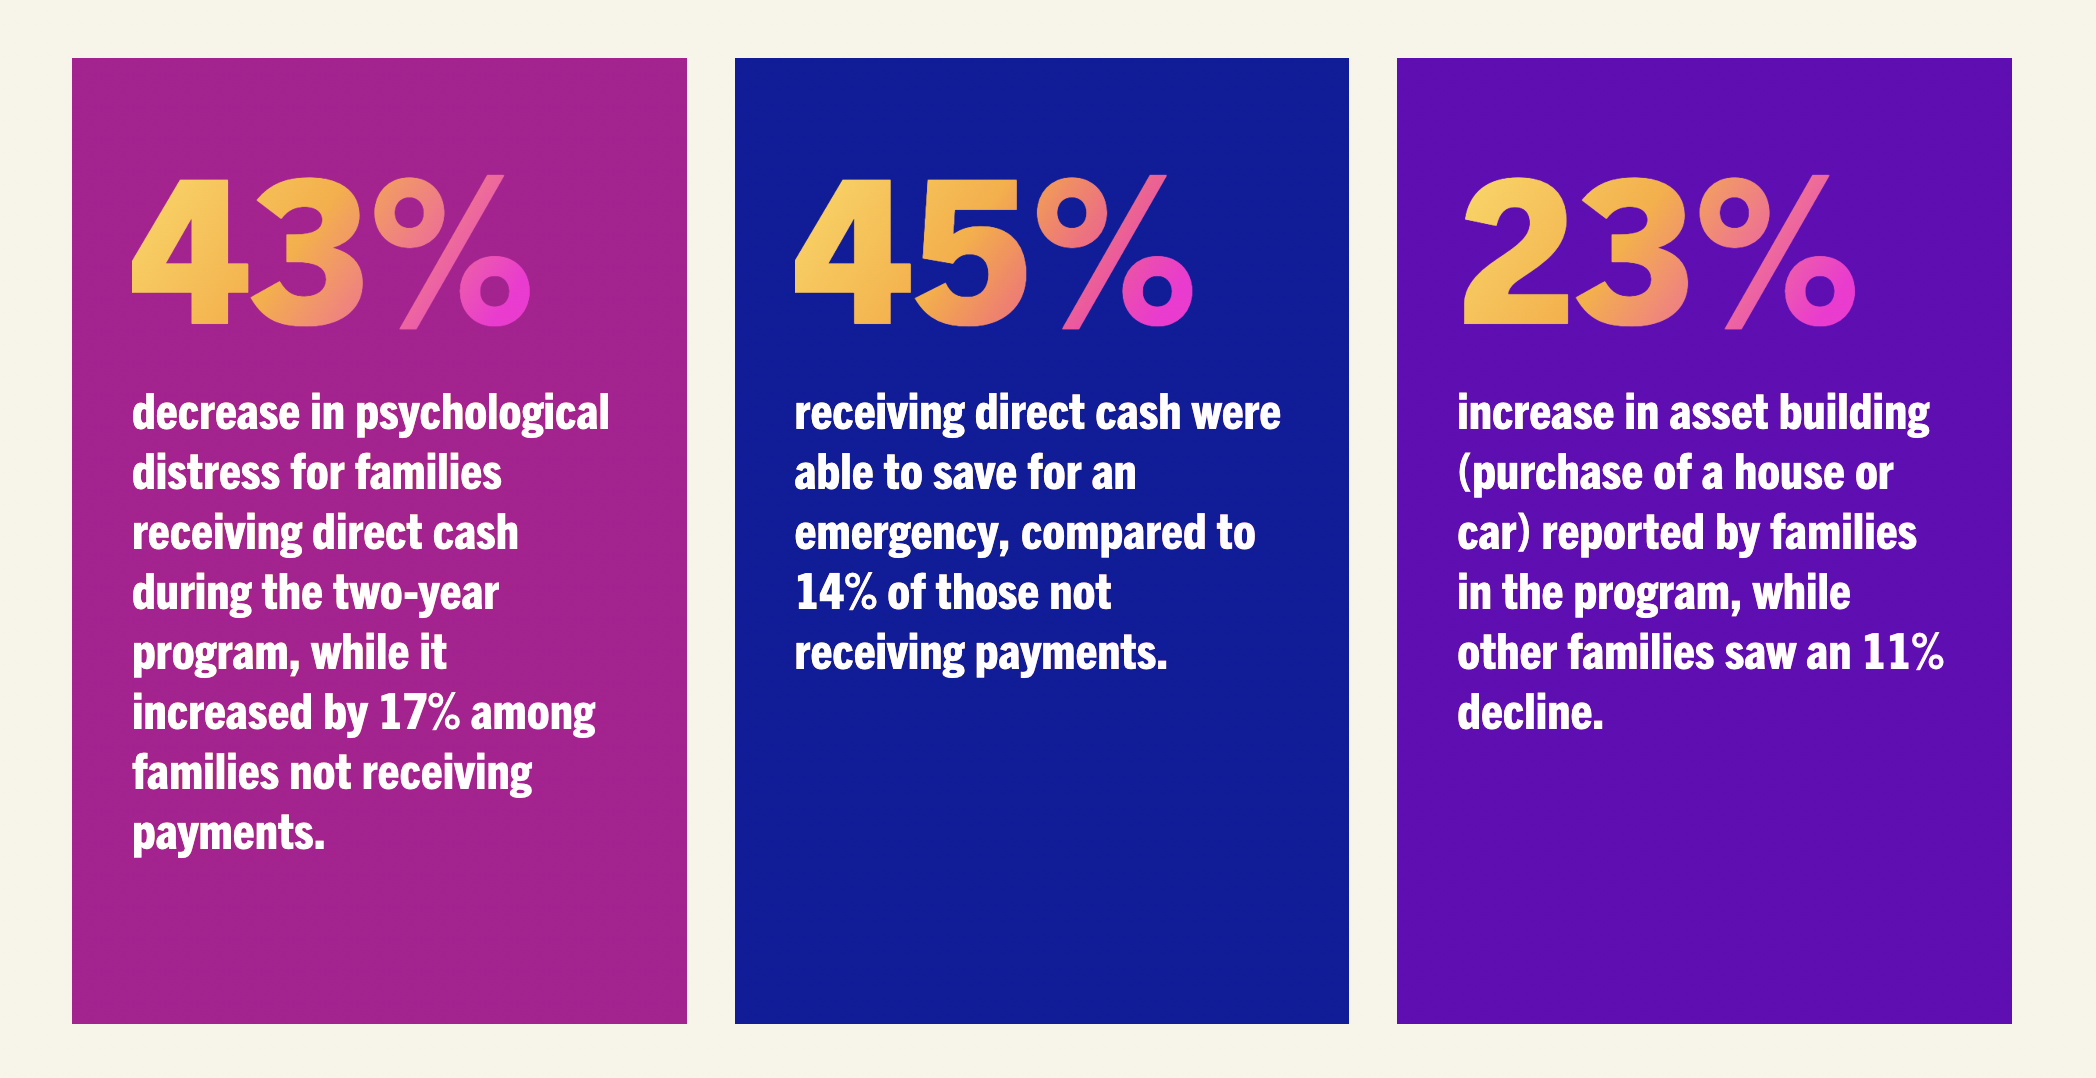 Graphic showing Families receiving direct cash payments had a 43% decrease in psychological distress compared to a 17% increase among families not receiving payments.  Among families receiving direct cash, 45% were able to save for an emergency, compared to 14% of those not receiving payments.  Families receiving direct cash saw a 23% increase in asset building (purchase of a house or car), while other families saw an 11% decline.